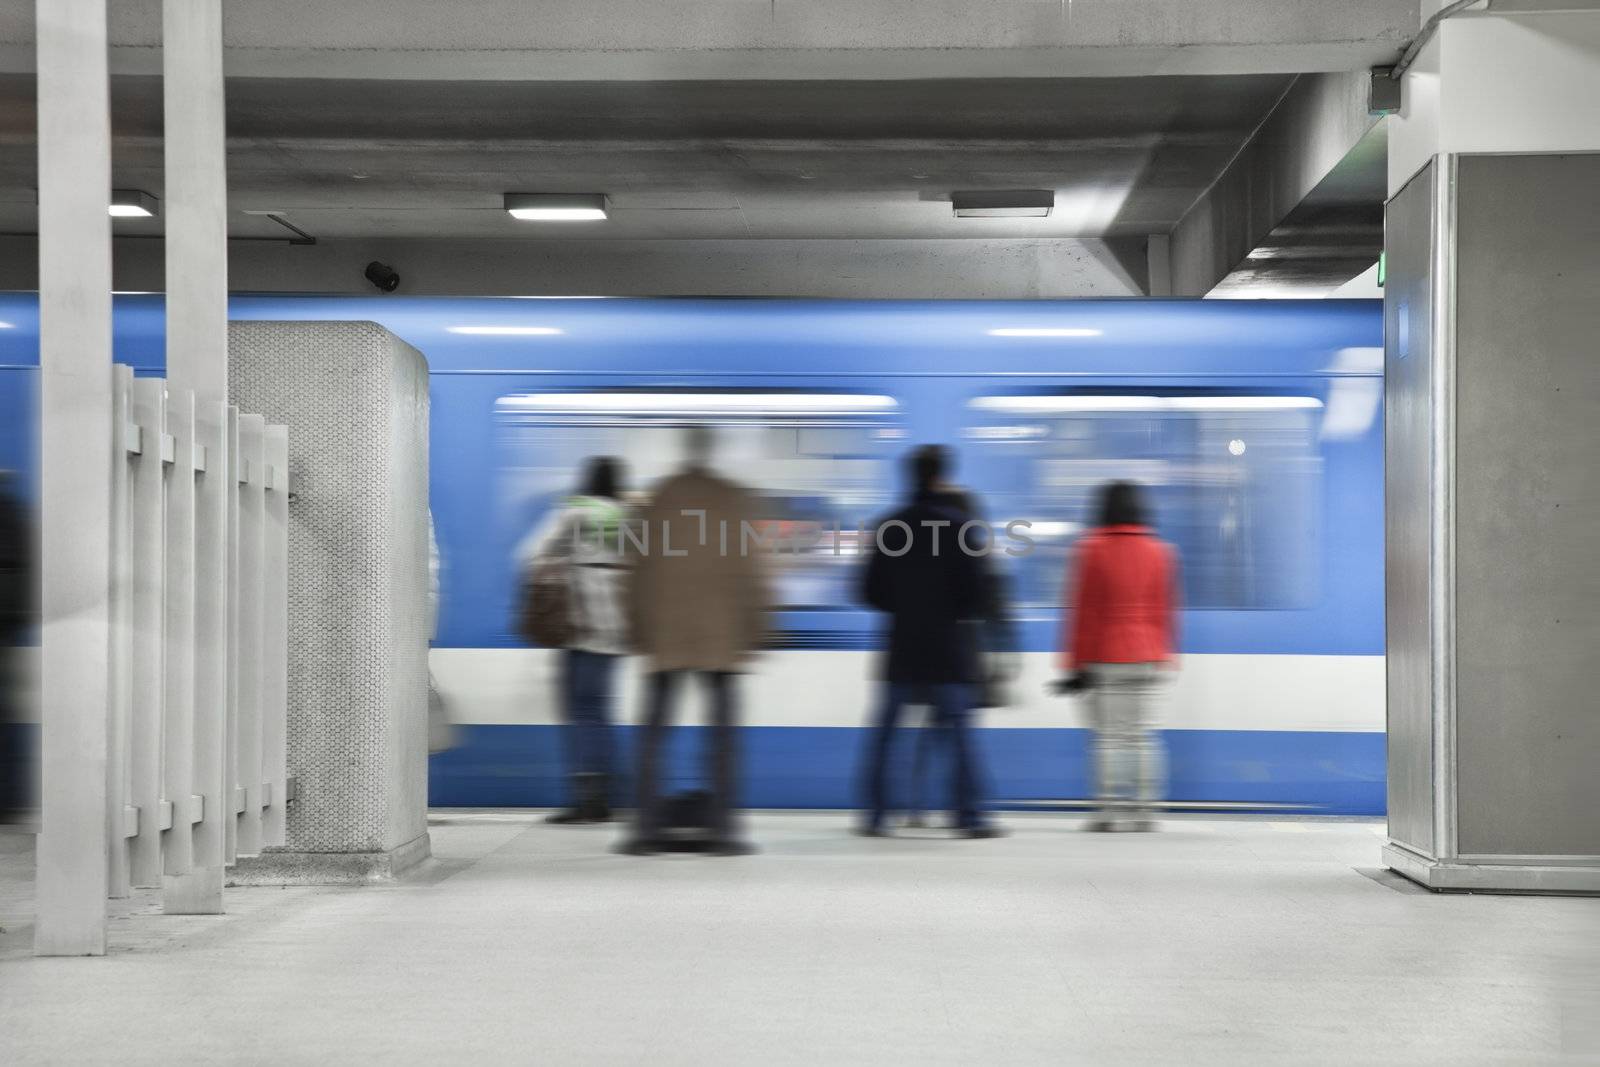 Montreal metro with motion